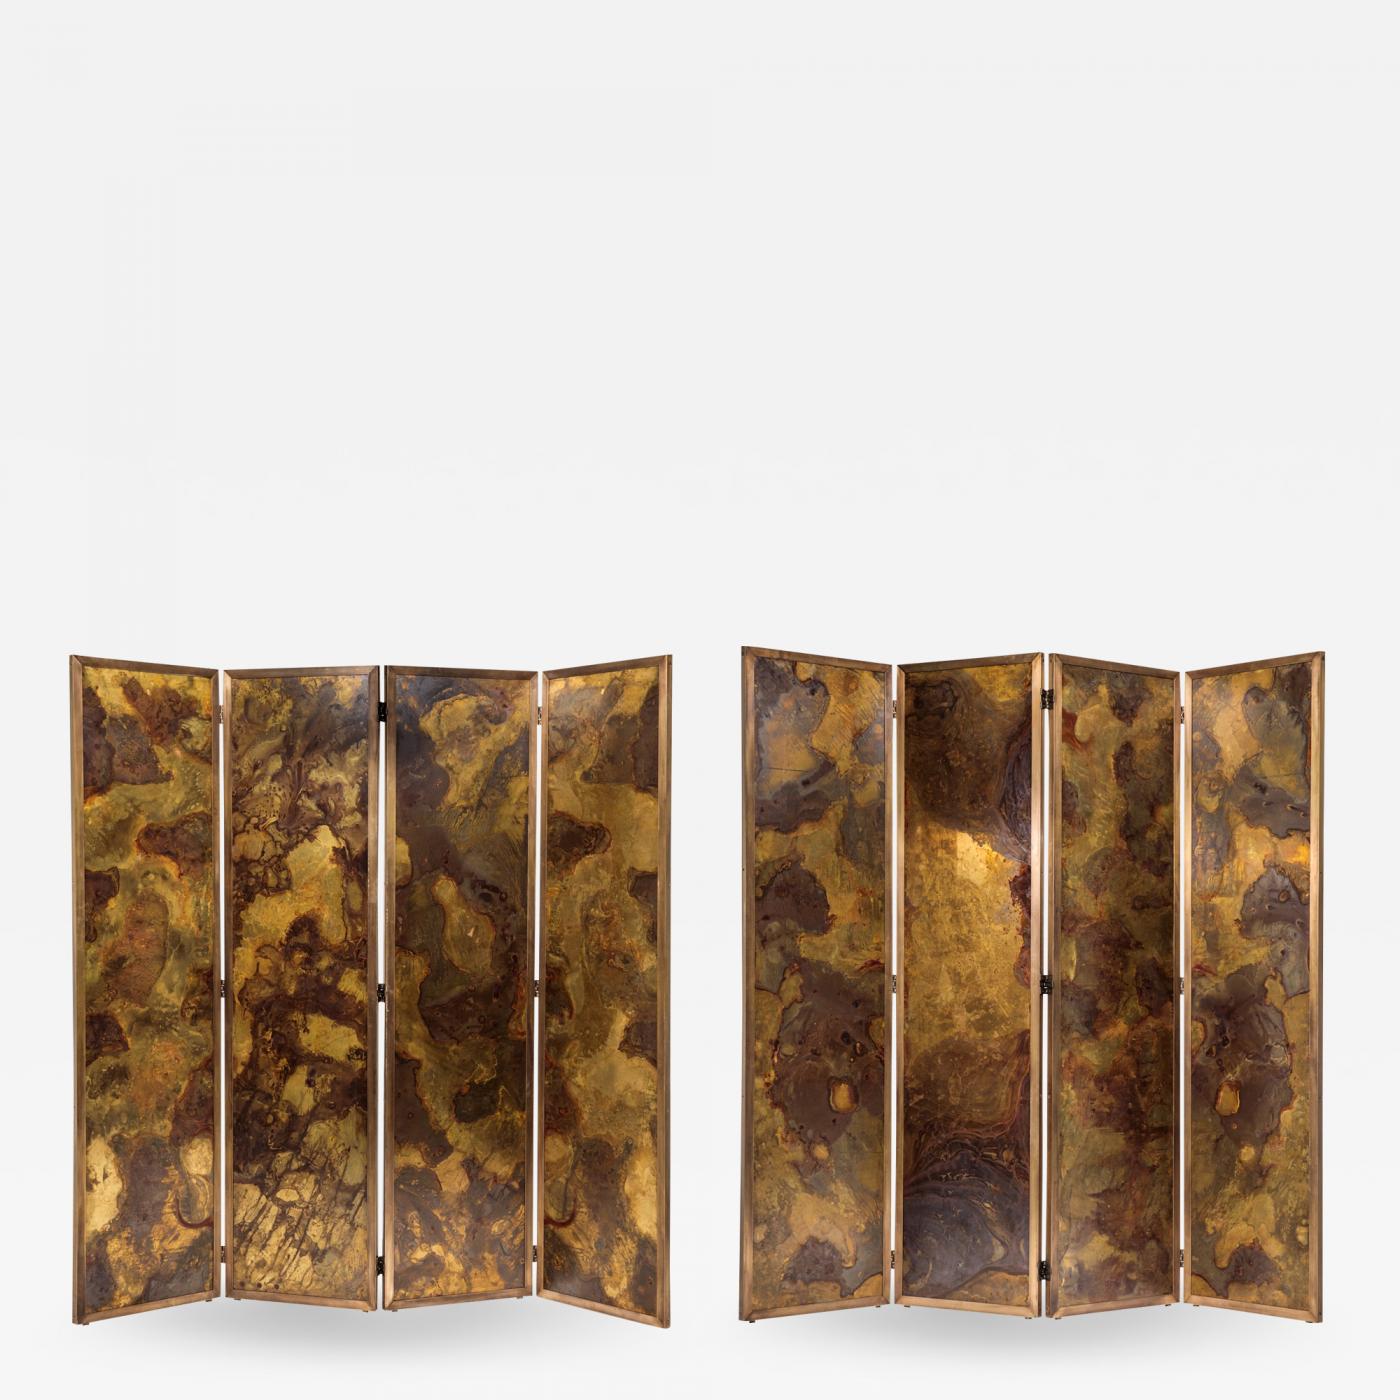 https://cdn.incollect.com/sites/default/files/zoom/Pair-of-large-screens-with-four-leaves-in-brass-oxidized-brass-and-mirror-383657-1492741.jpg